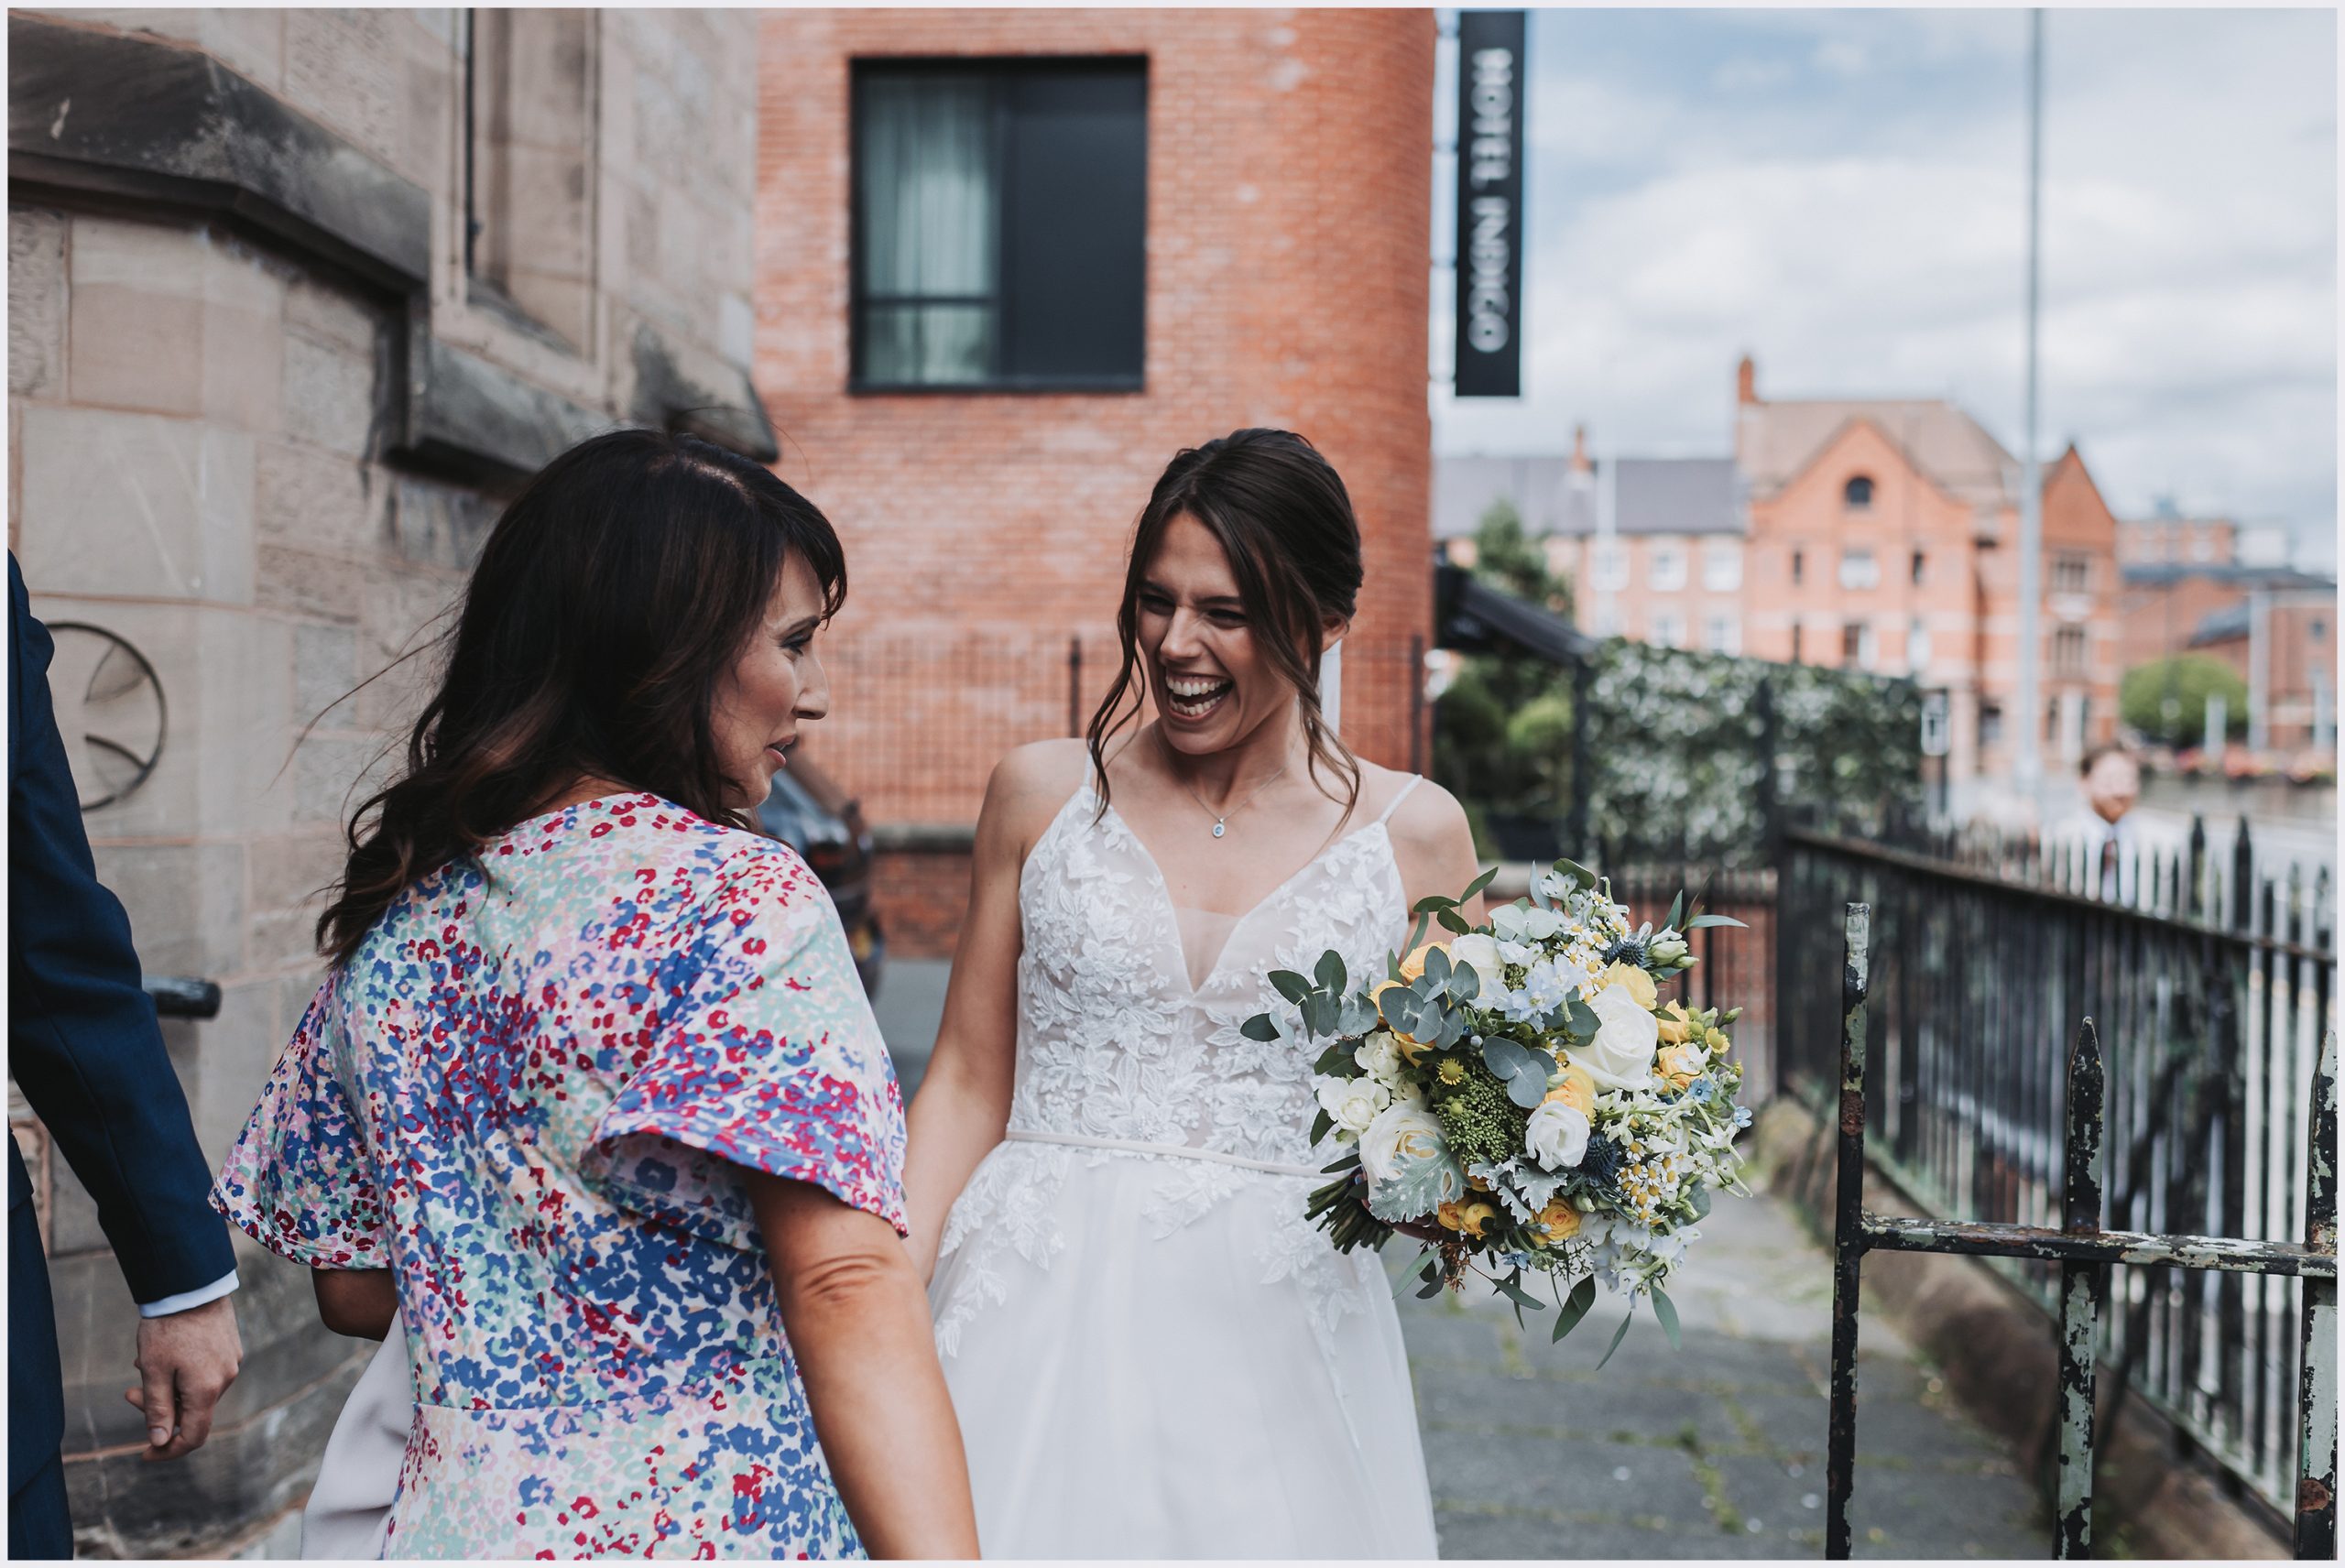 A bride and a friend share a joke smiling outside the church where she has just got married in Chester.  Image captured by Helena Jayne Photography a wedding photographer based in north Wales